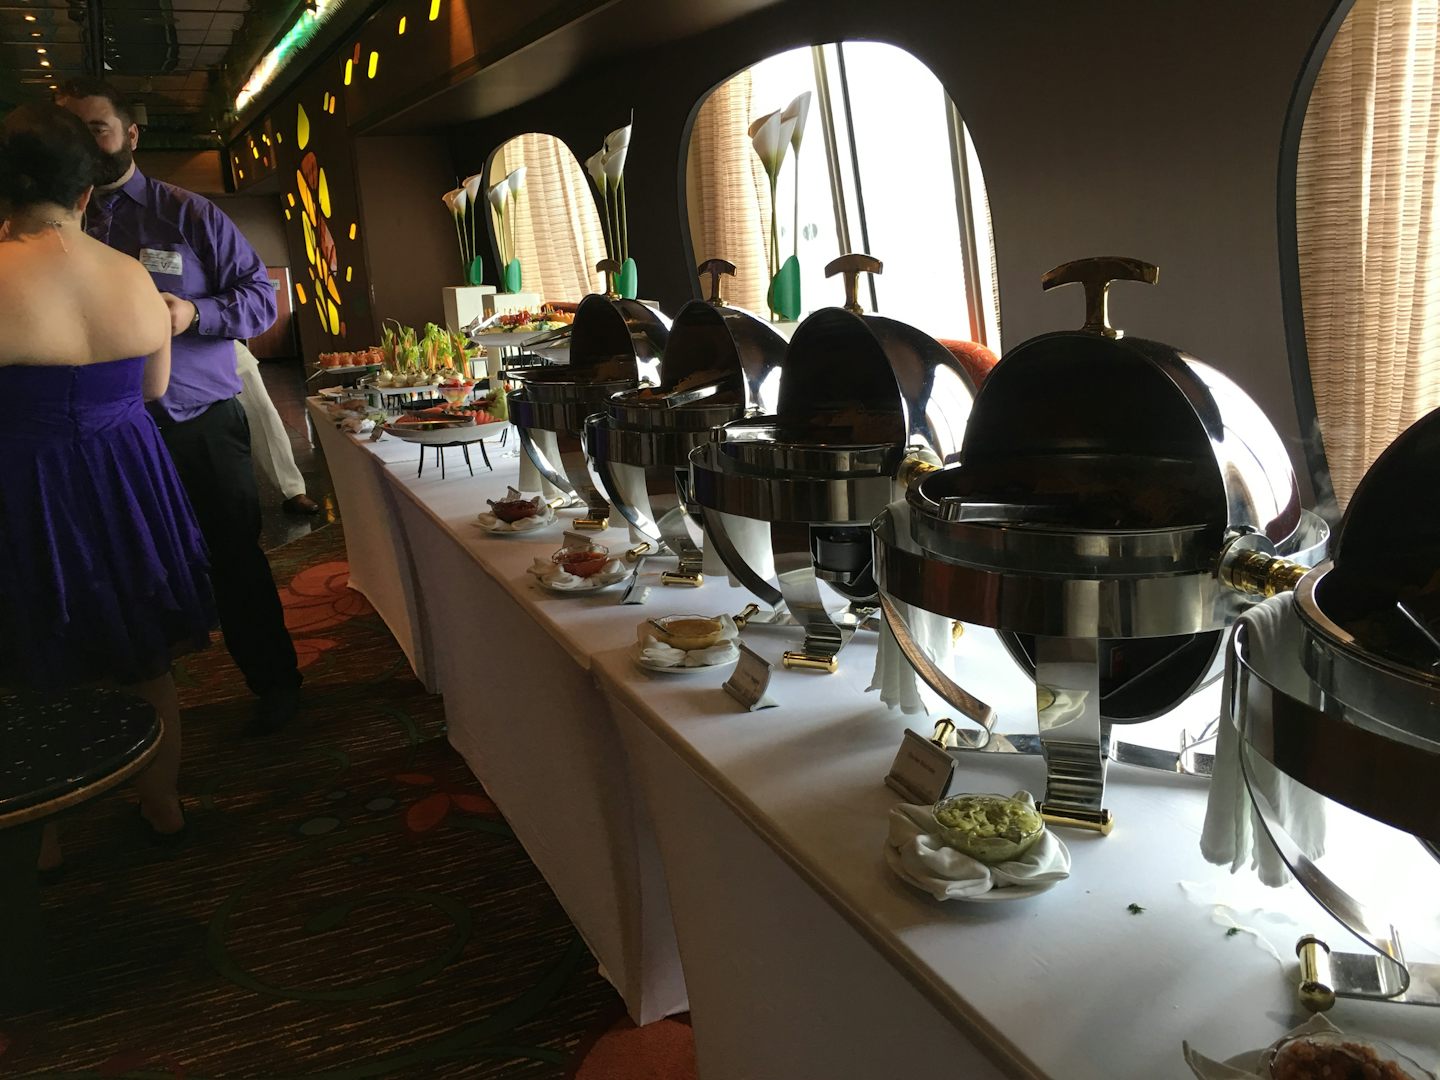 This was the spread of food for the reception on the ship